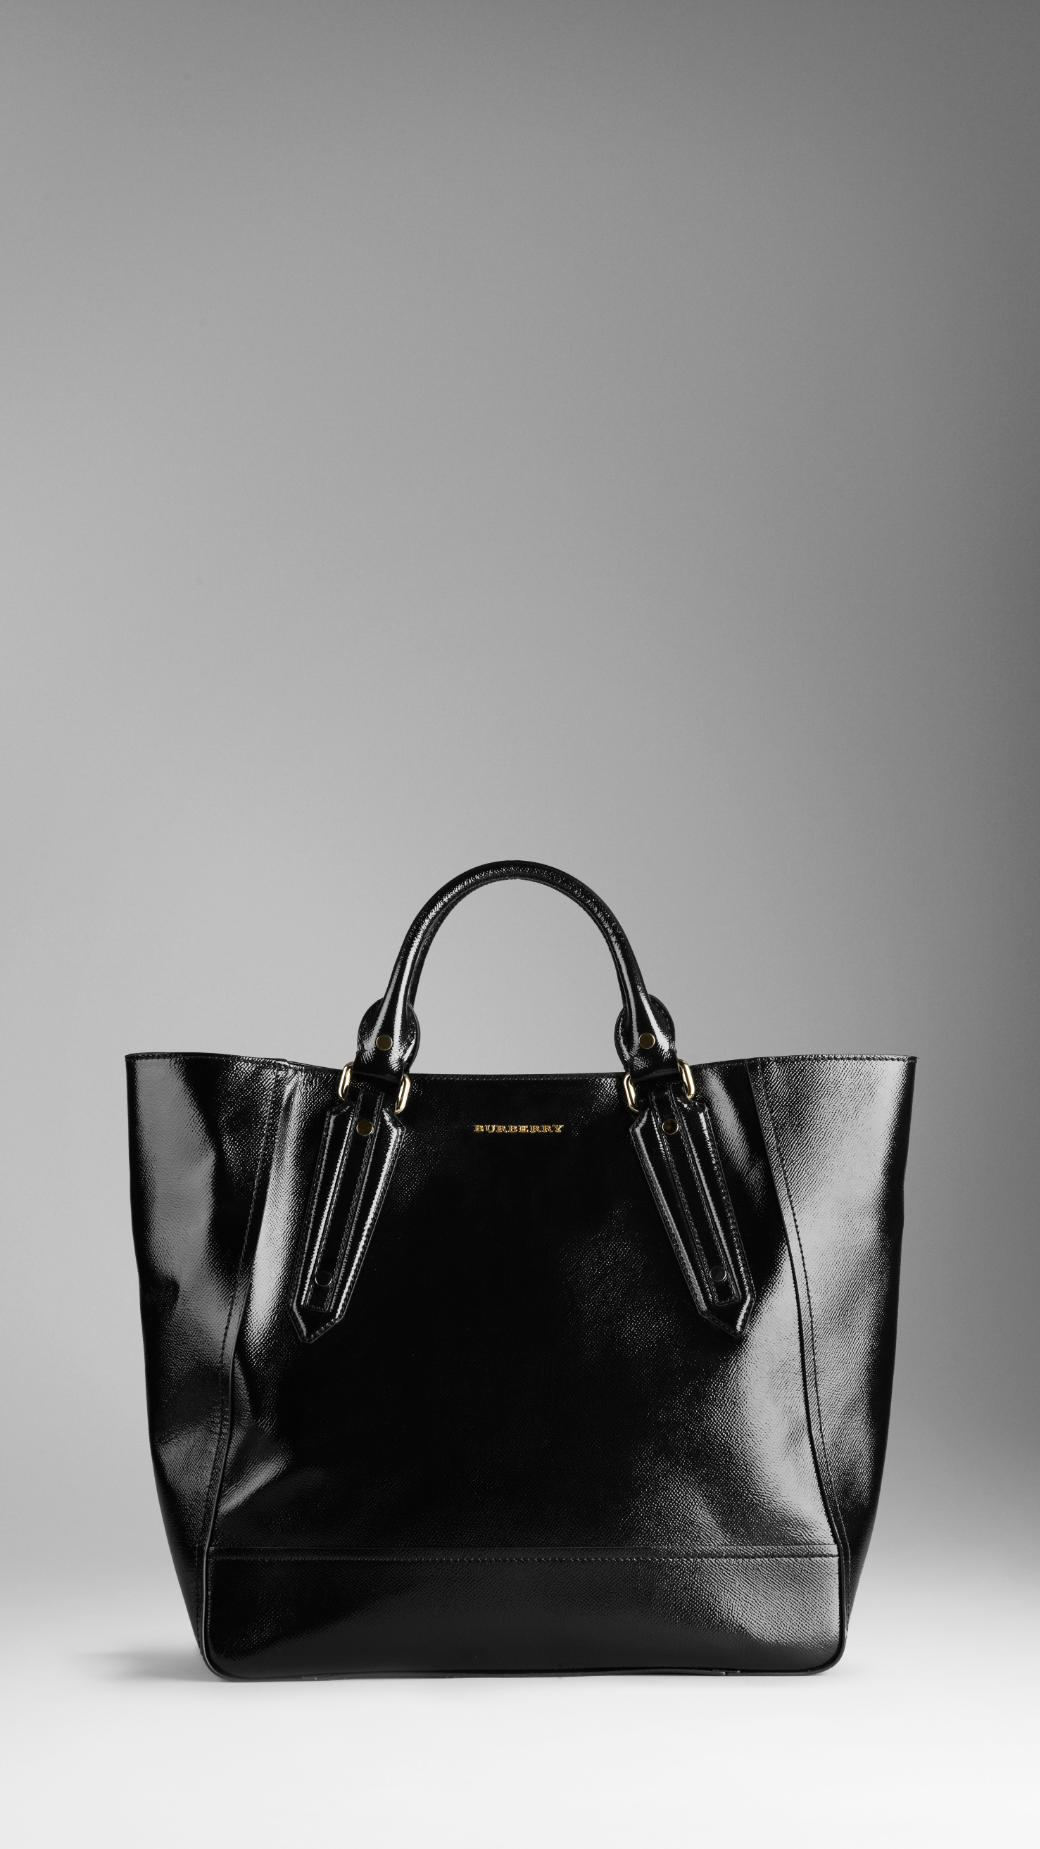 Lyst - Burberry Large Patent London Leather Portrait Tote Bag in Black